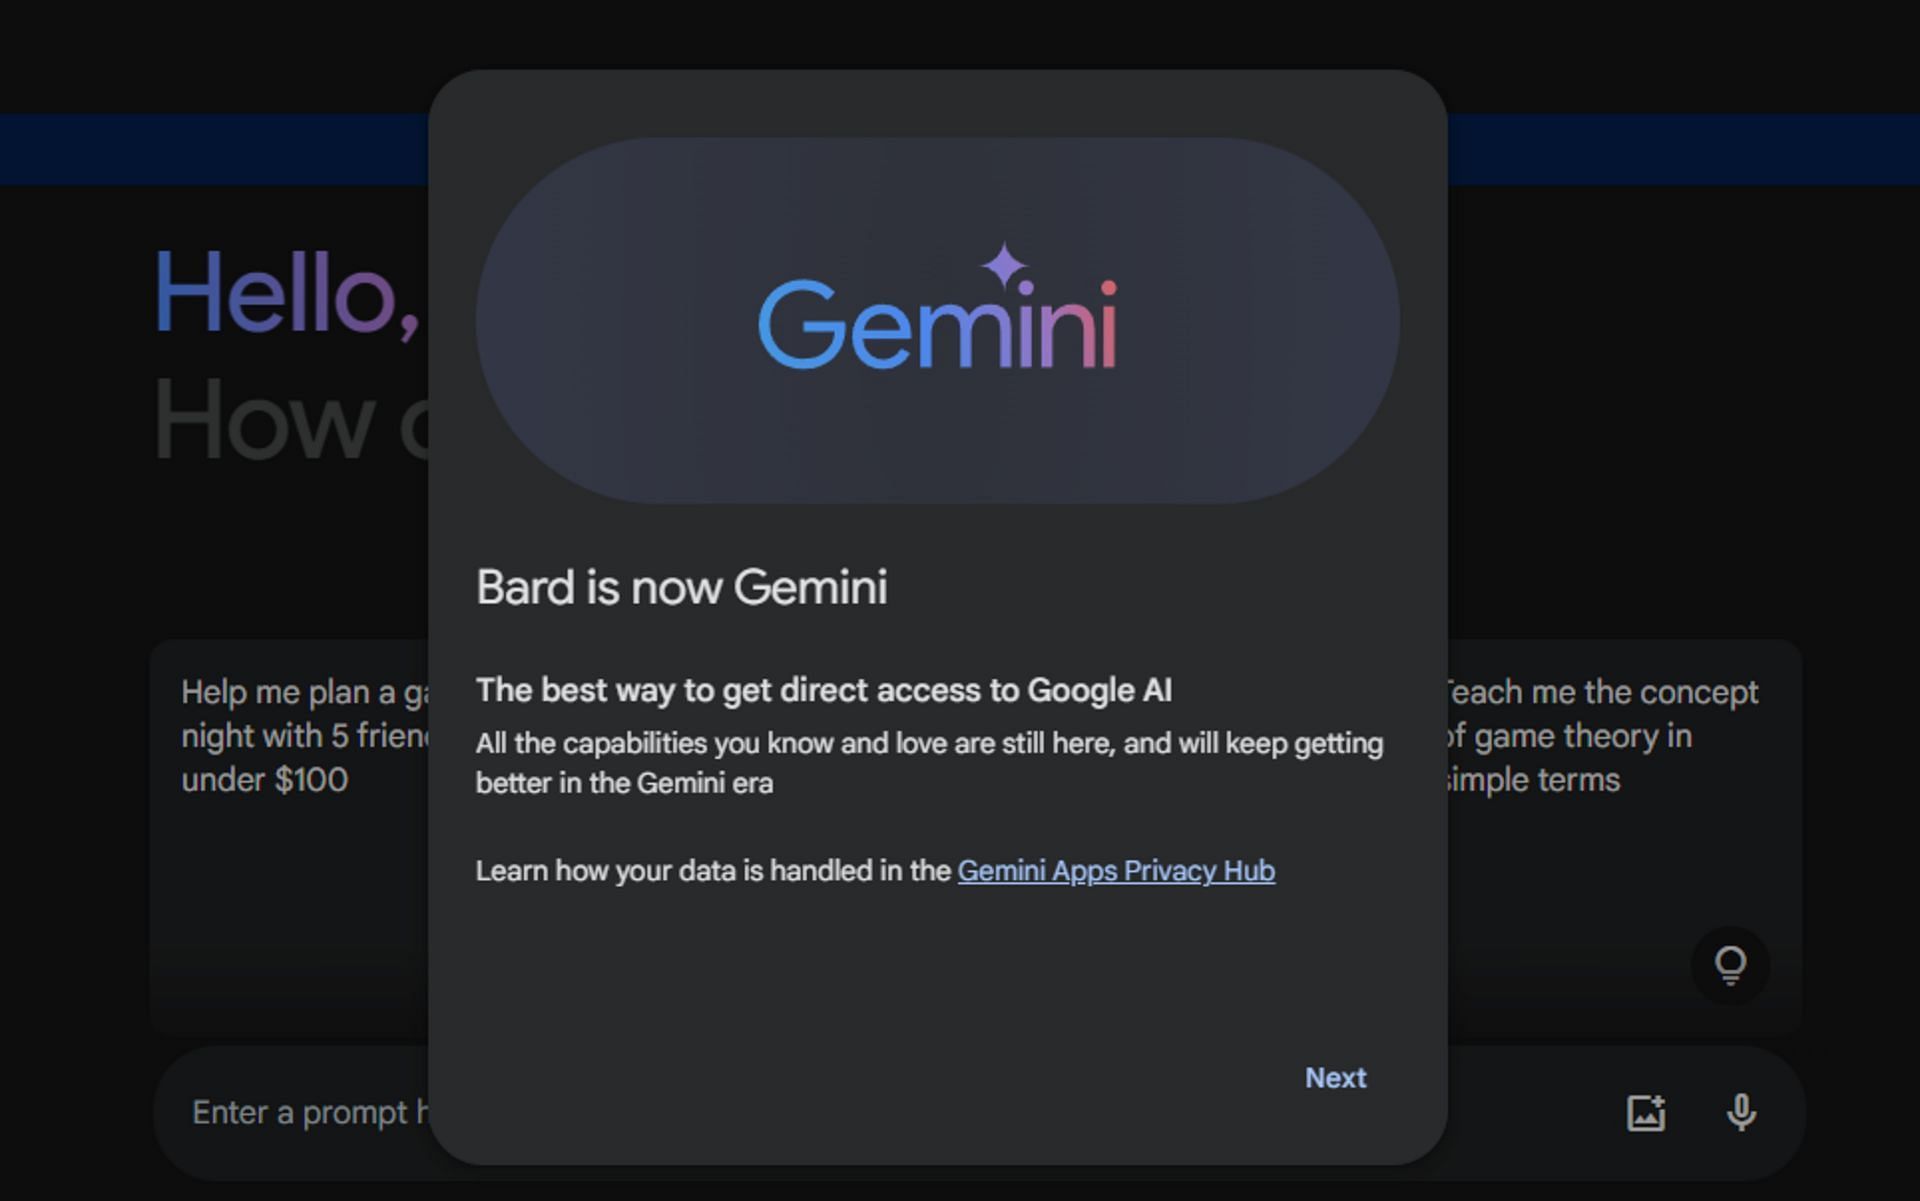 Log-in interface of one of the best AI Chatbots, Gemini. (Image via Gemini)